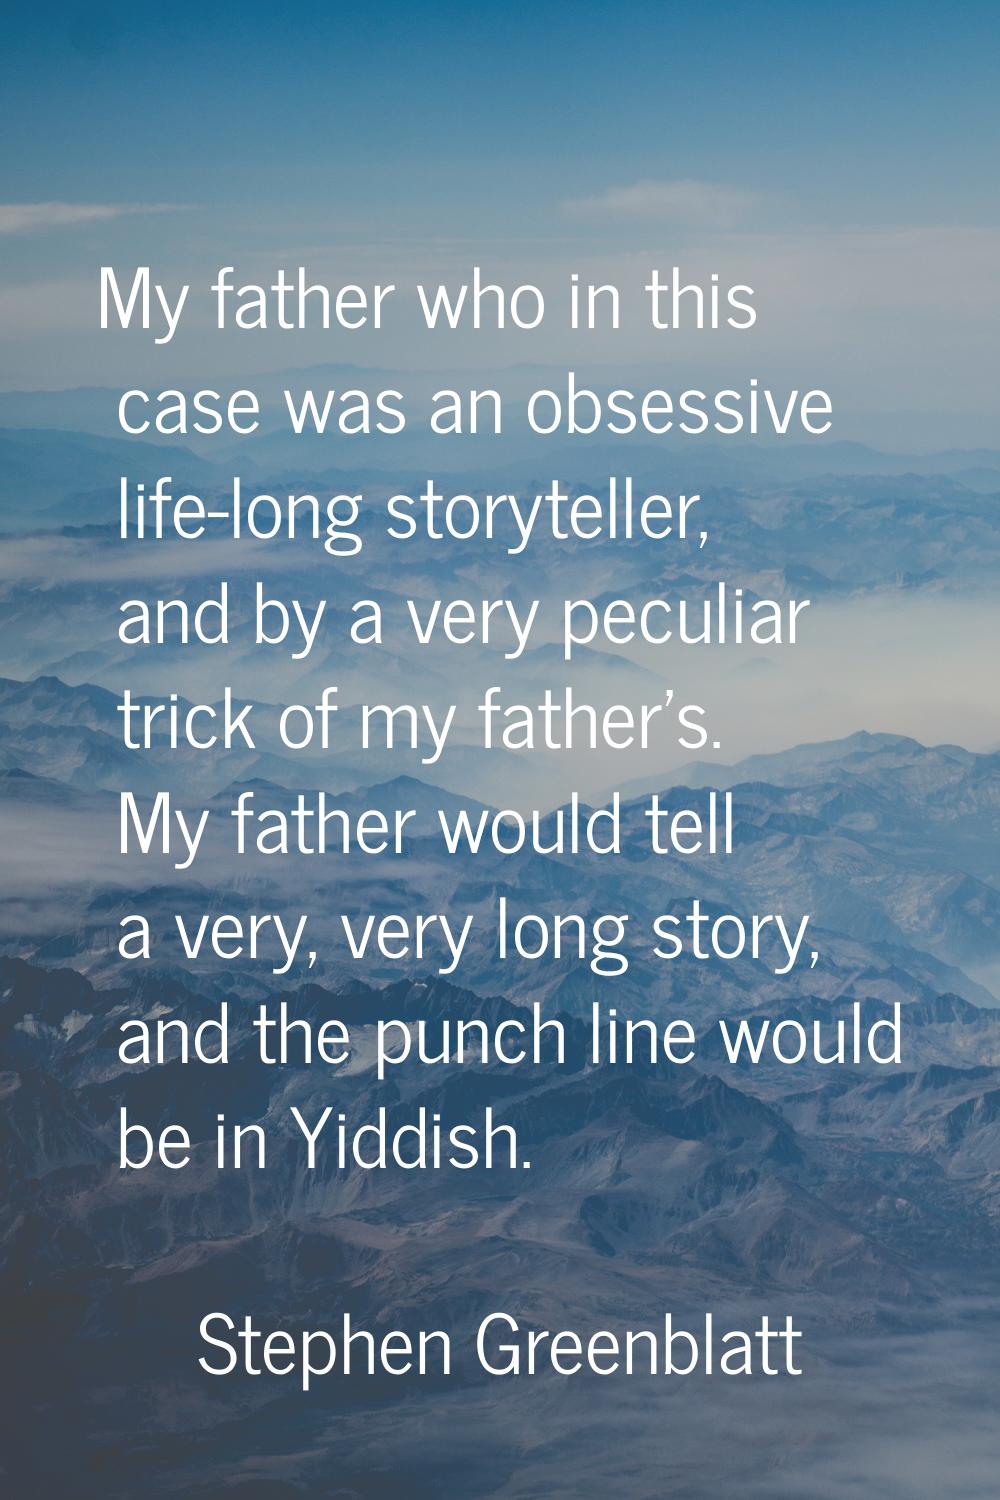 My father who in this case was an obsessive life-long storyteller, and by a very peculiar trick of 